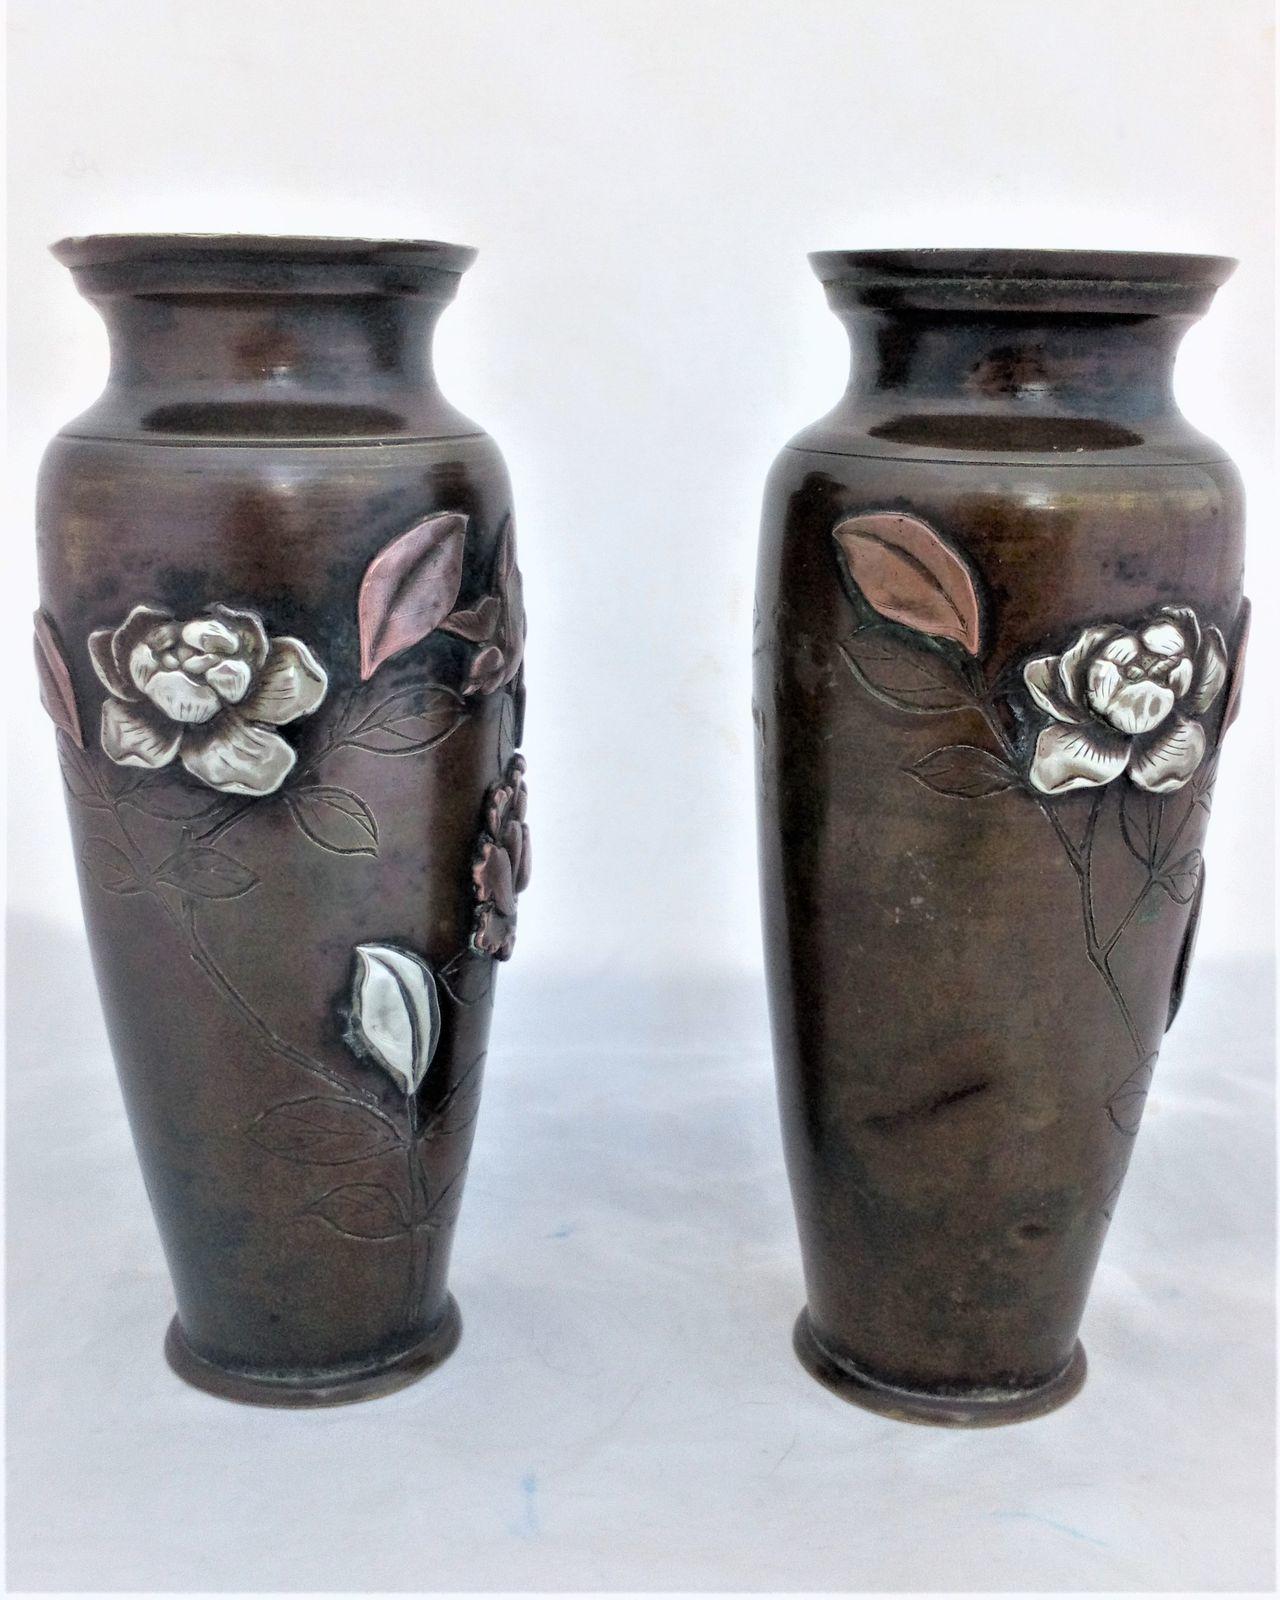 A pair of antique Japanese patinated bronze vases decorated with applied mixed metal birds and peony flowers made in the Meiji period circa 1900.  each 6 inches high and 2.5 inches diameter.